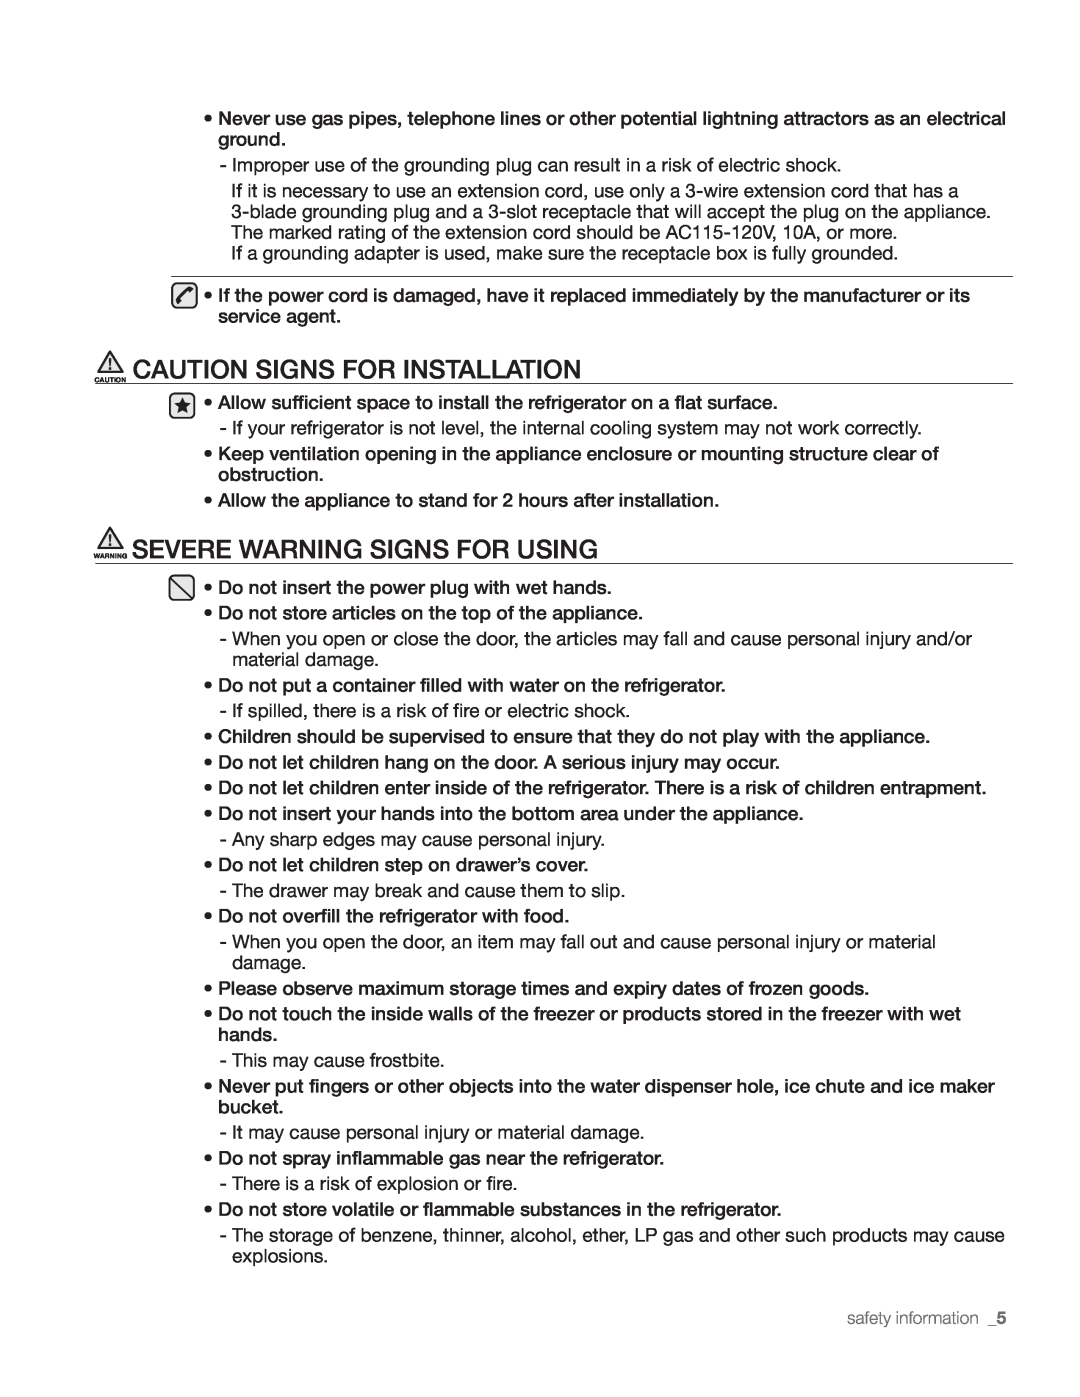 Samsung DA68-01890Q user manual Caution Caution Signs For Installation, Warning Severe Warning Signs For Using 